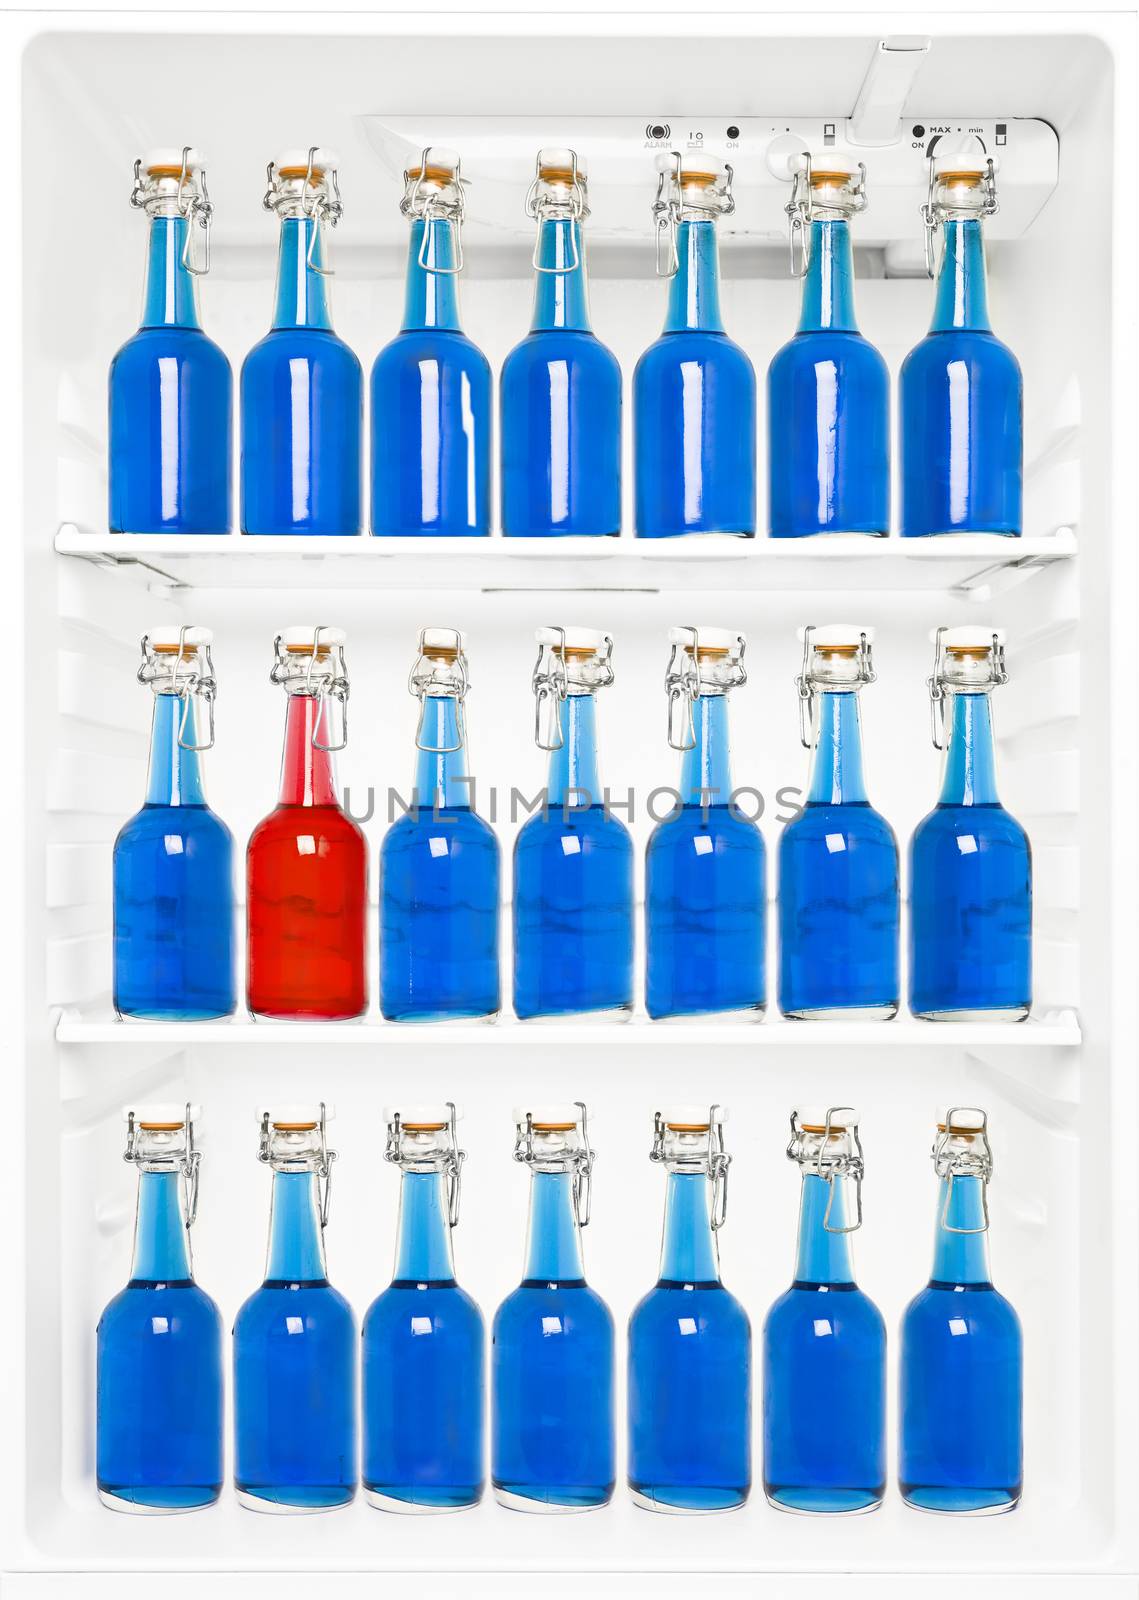 One Red Bottle among a large group of blue bottles in a fridge